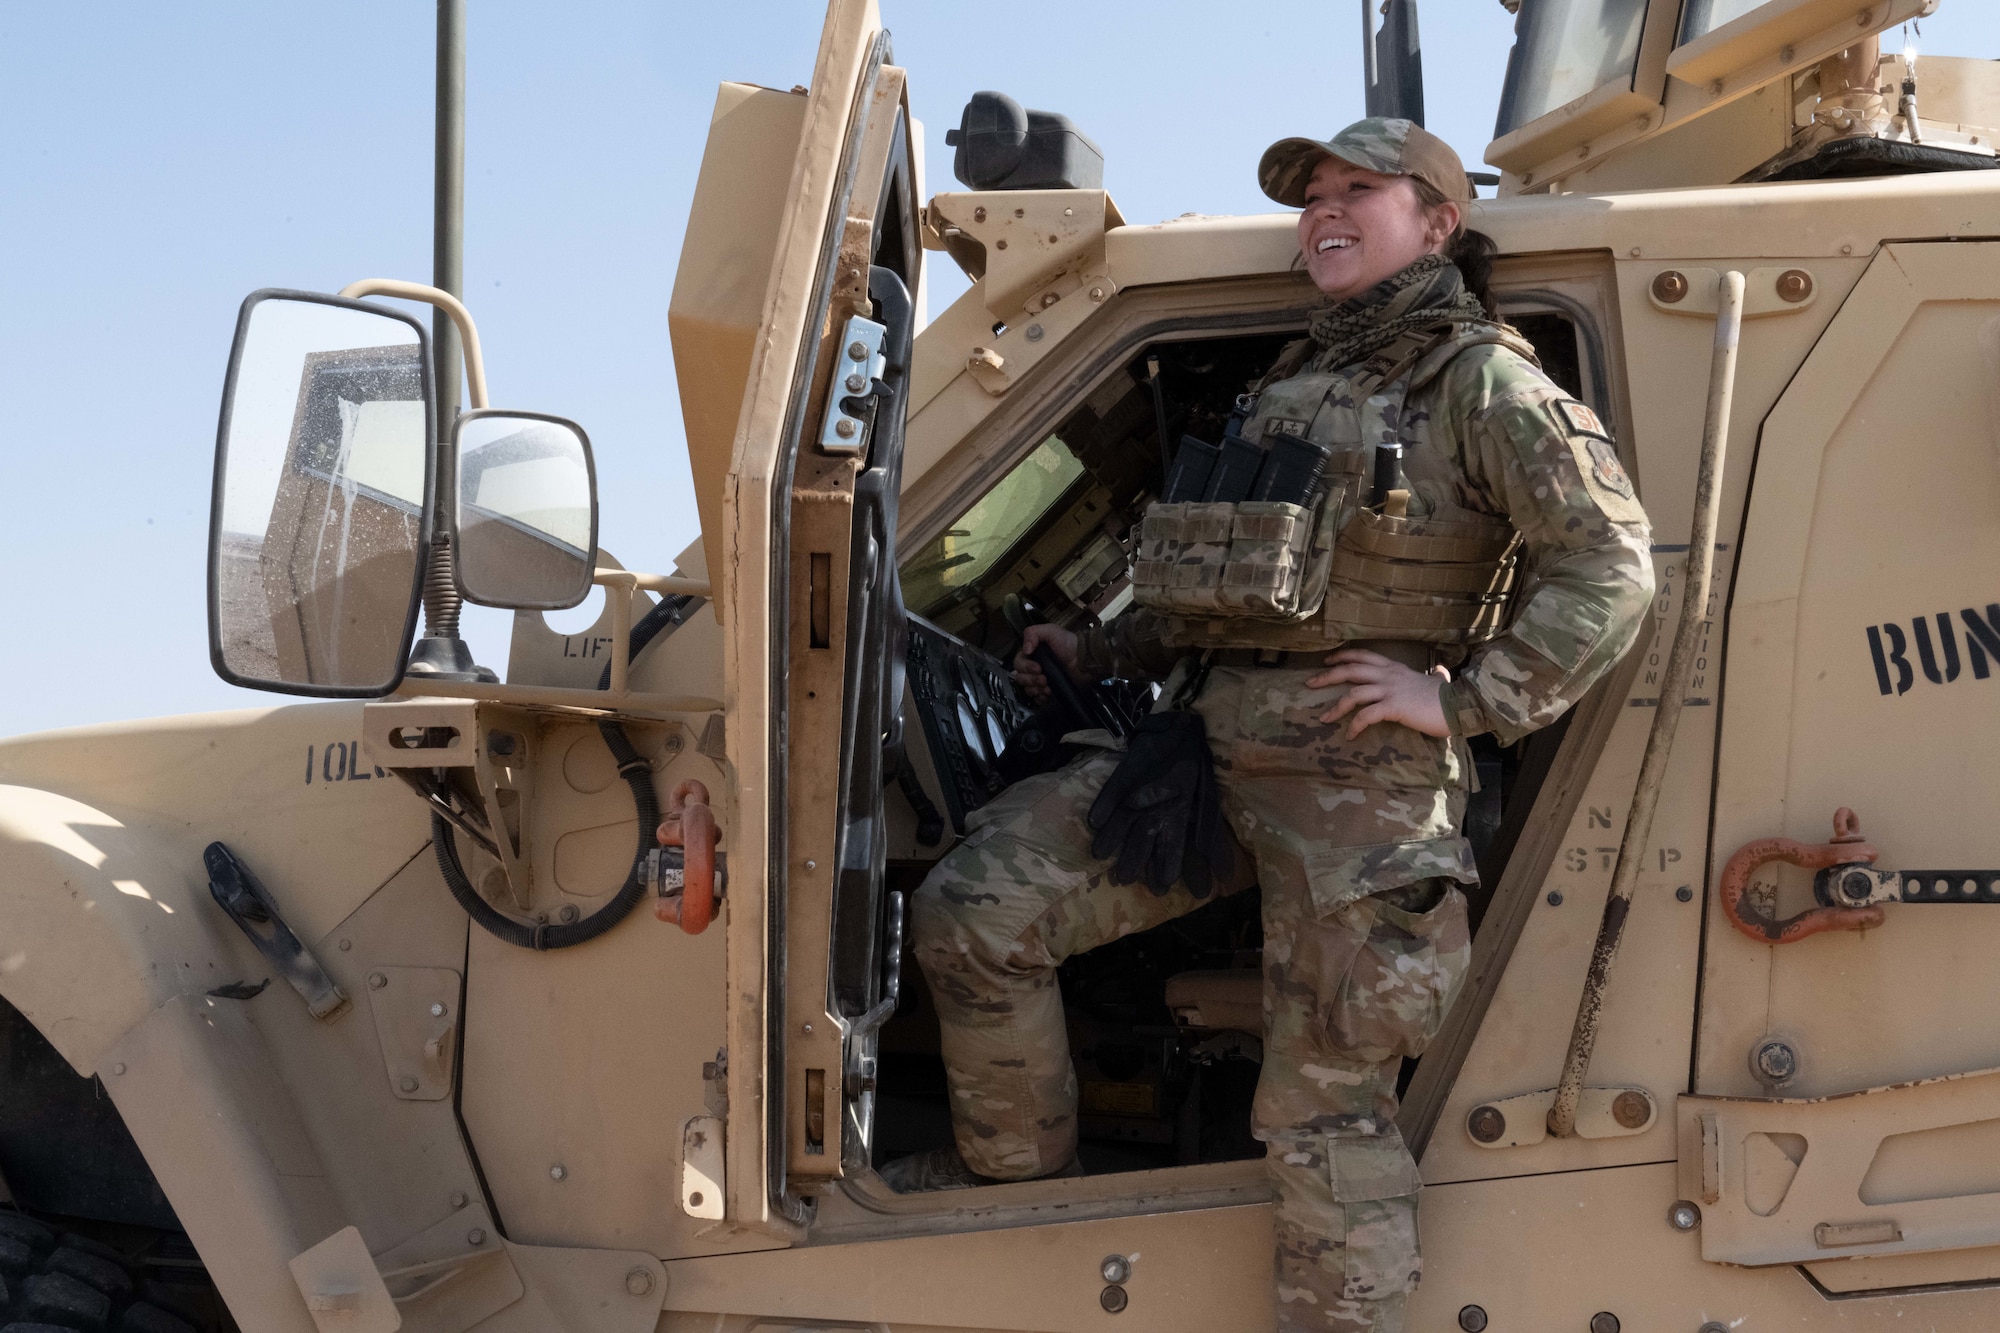 U.S. Air Force Airman 1st Class Hanna Smith is 22 years old and has seemingly already lived two distinct lives.  The 332d Expeditionary Security Forces, Rapid Response Airman already shines among her peers, performing tasks not everyone can, like driving the Mine-Resistant Ambush Protected All-Terrain Vehicle or M-ATV.